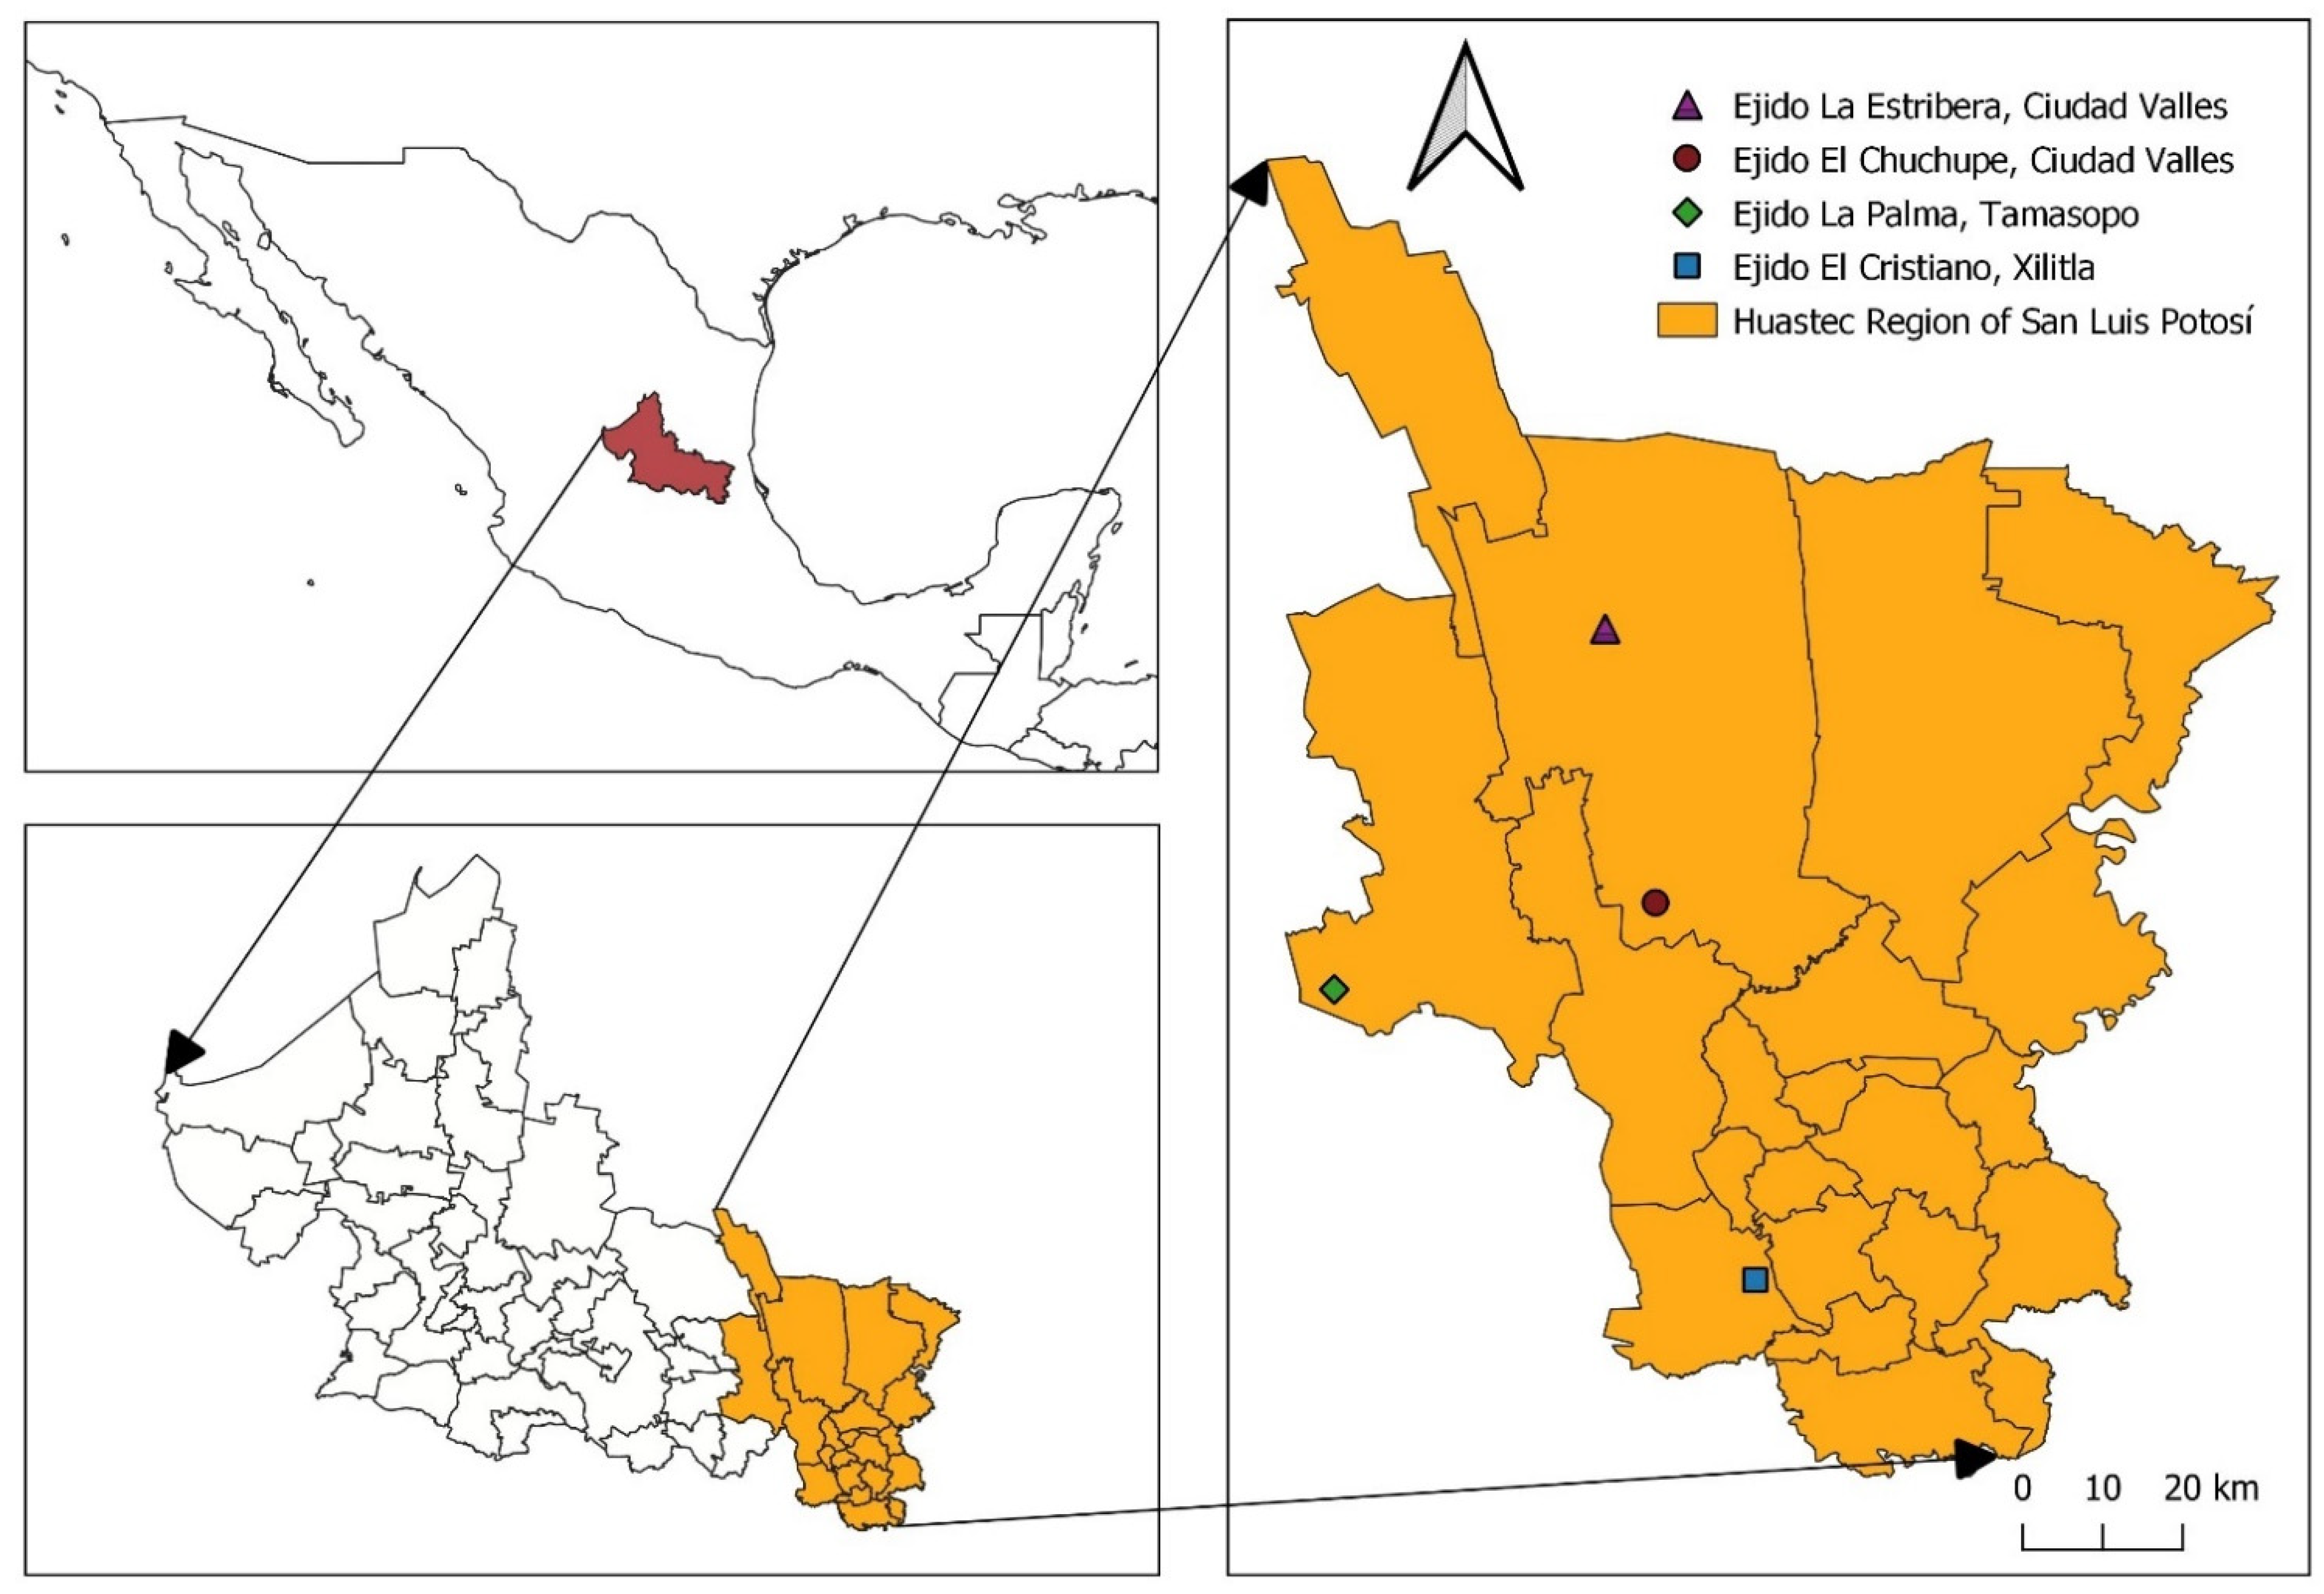 Diversity | Free Full-Text | Conservation of Biocultural Diversity in the  Huasteca Potosina Region, Mexico